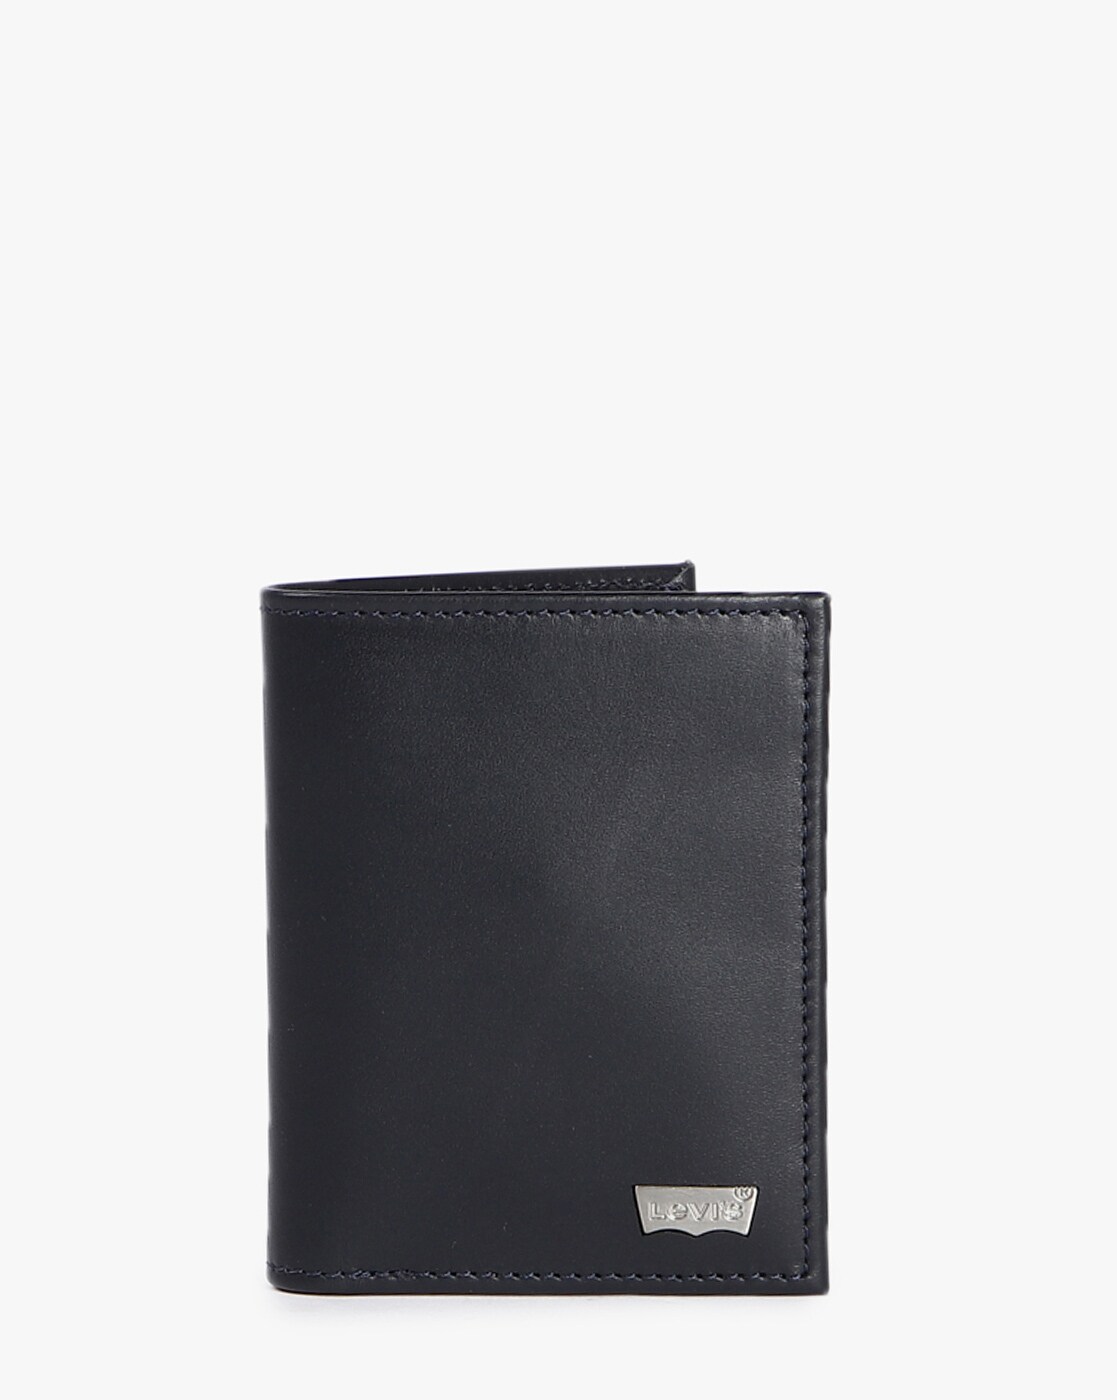 Buy Levi's Leather Brown Men's Wallet (37541-0036) at Amazon.in